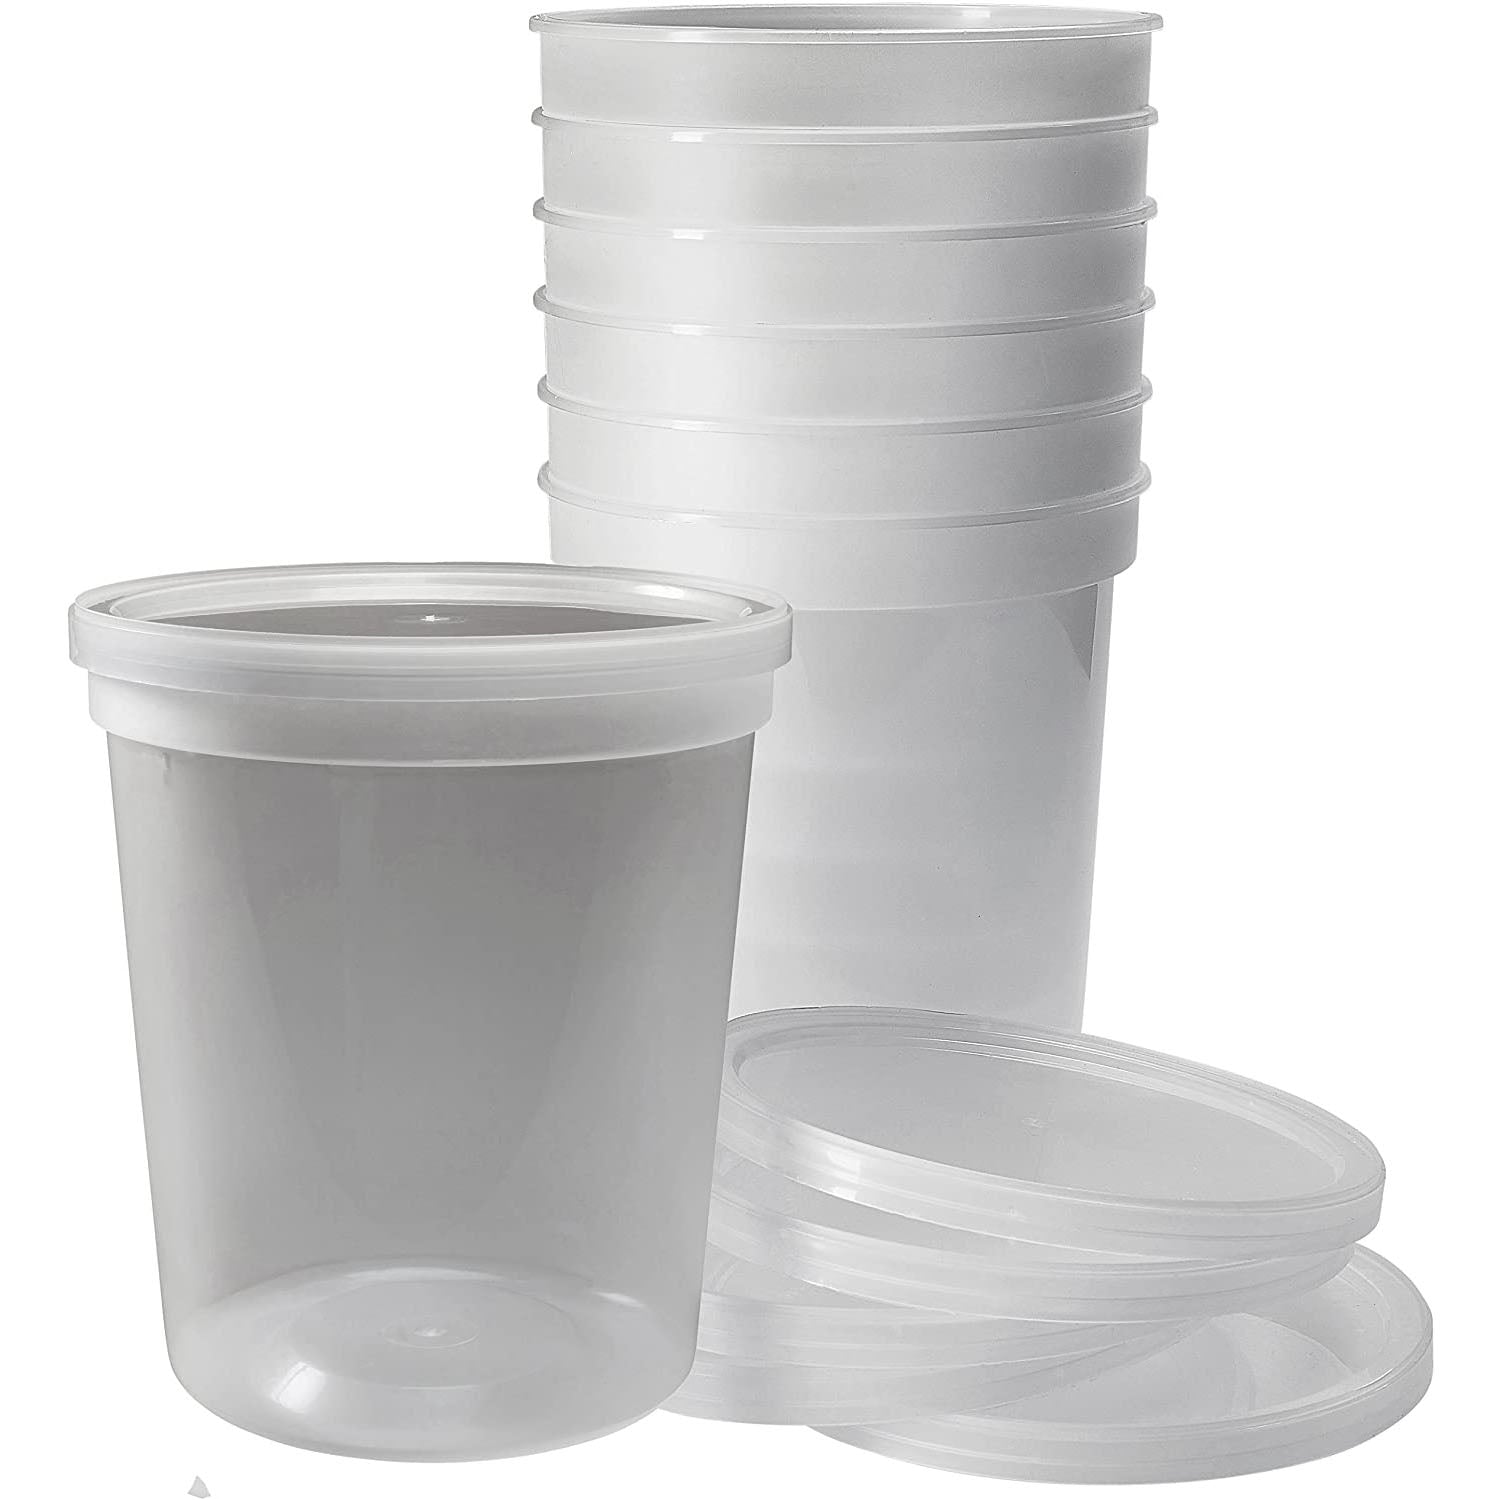 Pantry Value 12 Oz Deli Containers with Lids Food Prep Containers, 48-Pack